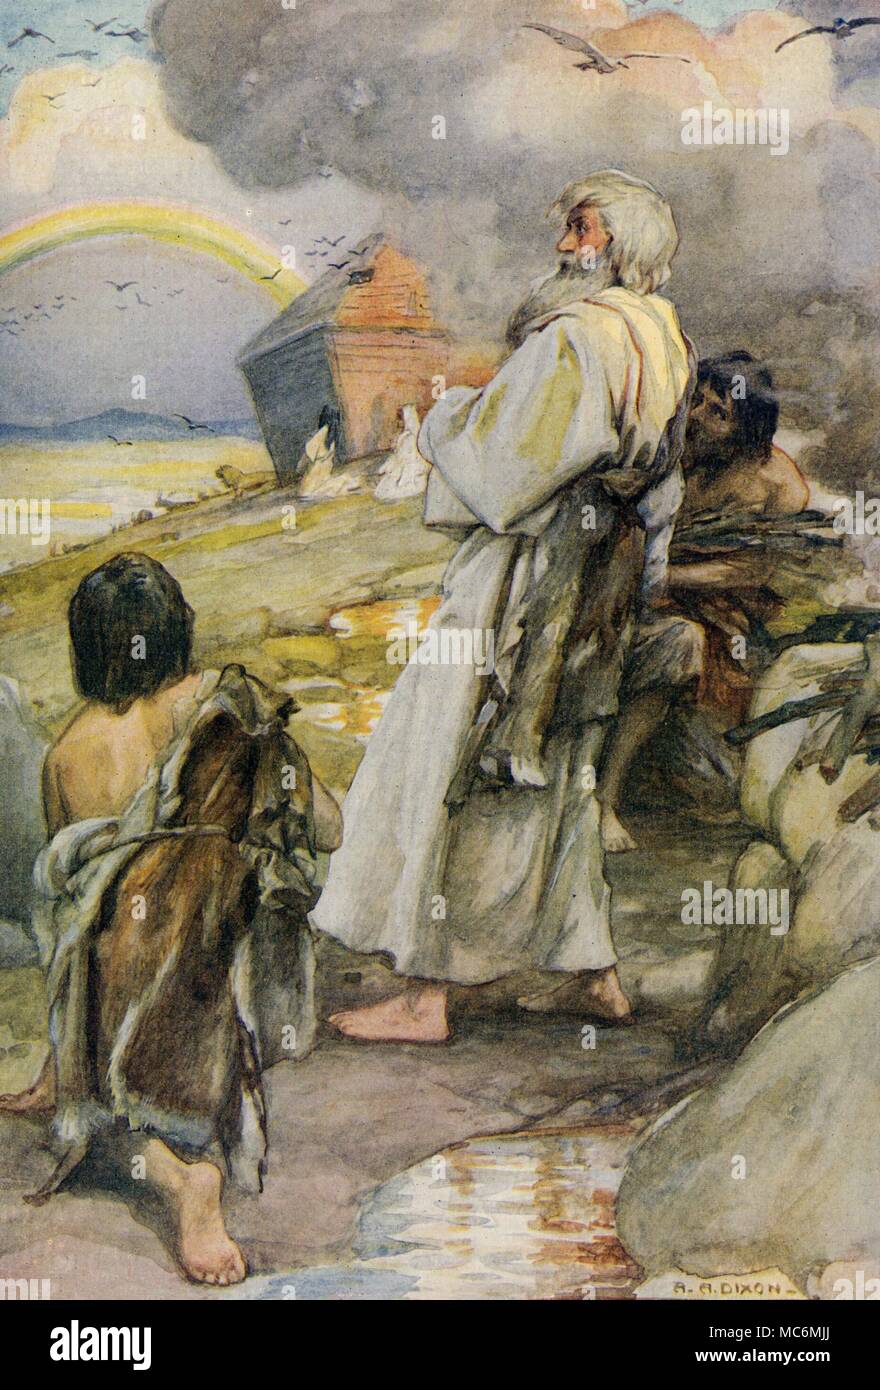 CHRISTIAN - OLD TESTAMENT - JEWISH MYTH - THE ARK 'Noah and his family come out of the ark' - where they witness the rainbow, as promise of the Lord. Illustration by Arthur Dixon for Theodora W. Wilson, The Old Testament Story, 1926. Stock Photo